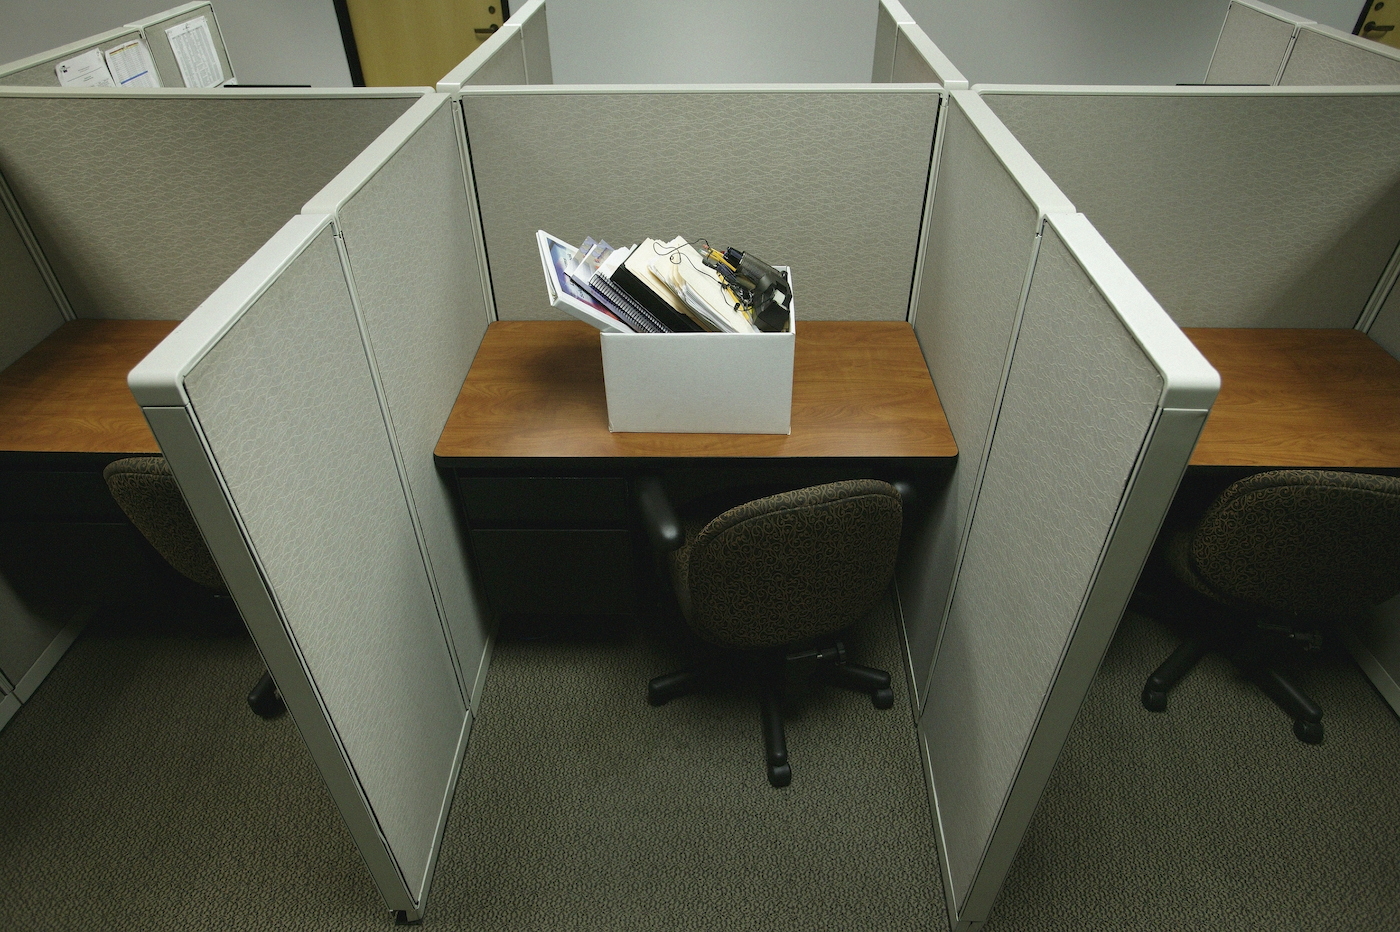 Cubicle with personal belongings box